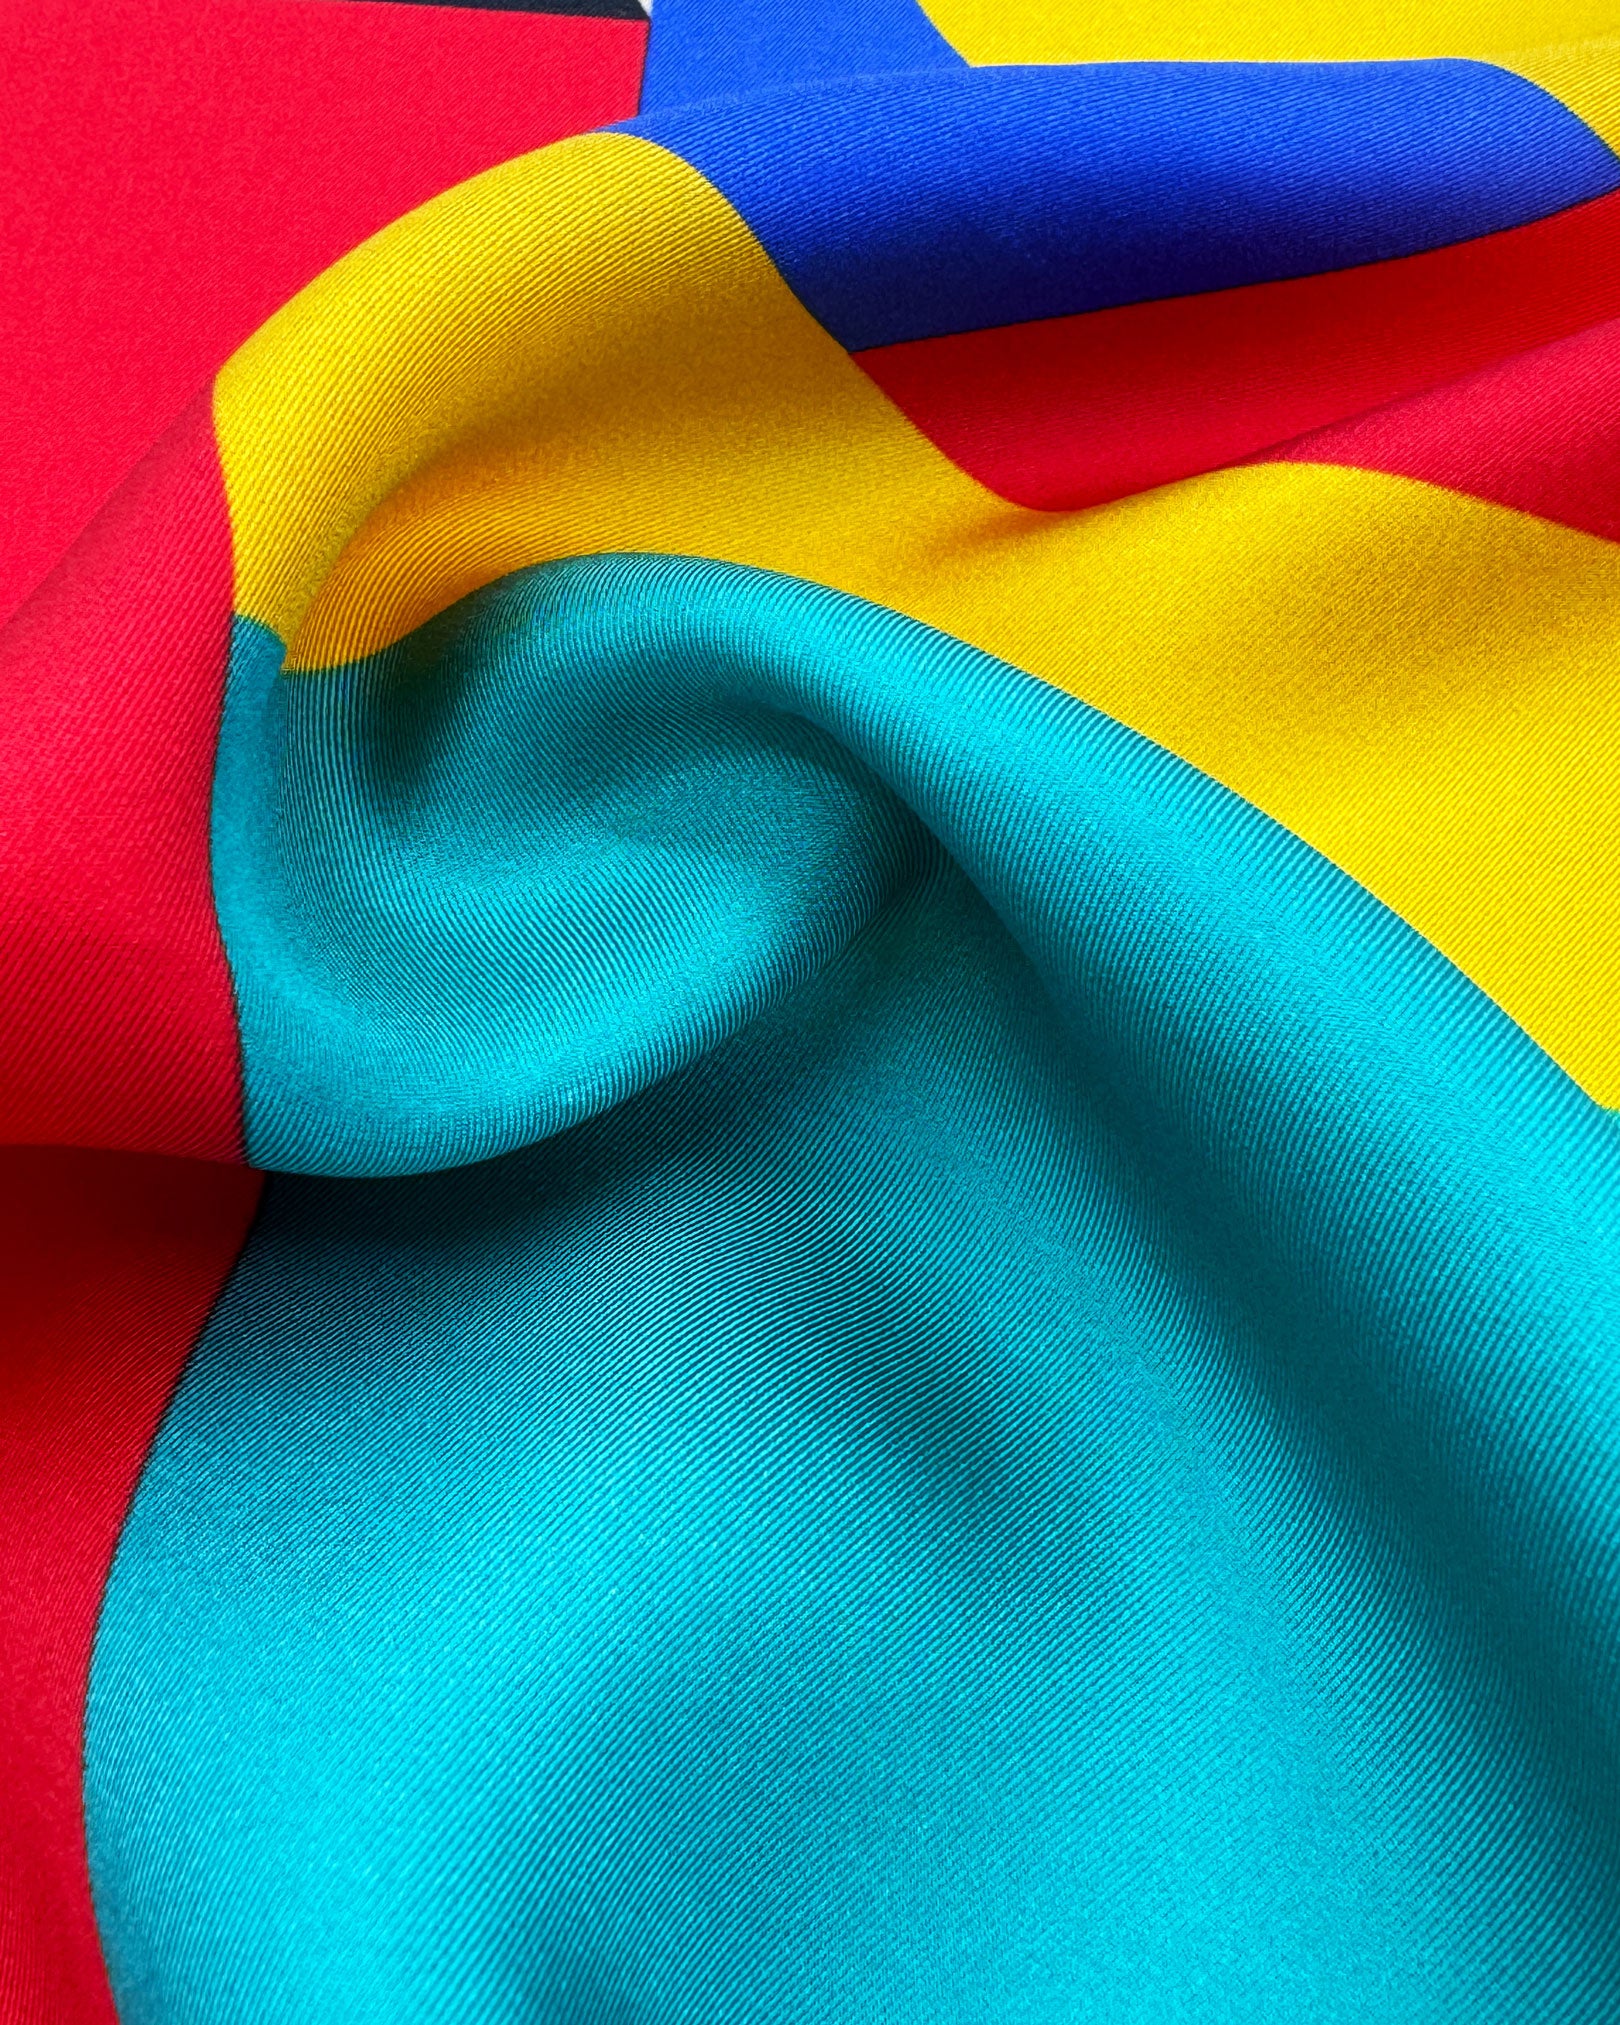 A ruffled close-up of the 'Munich' silk neckerchief, presenting a closer view of the Bauhaus-inspired, primary coloured patterns.